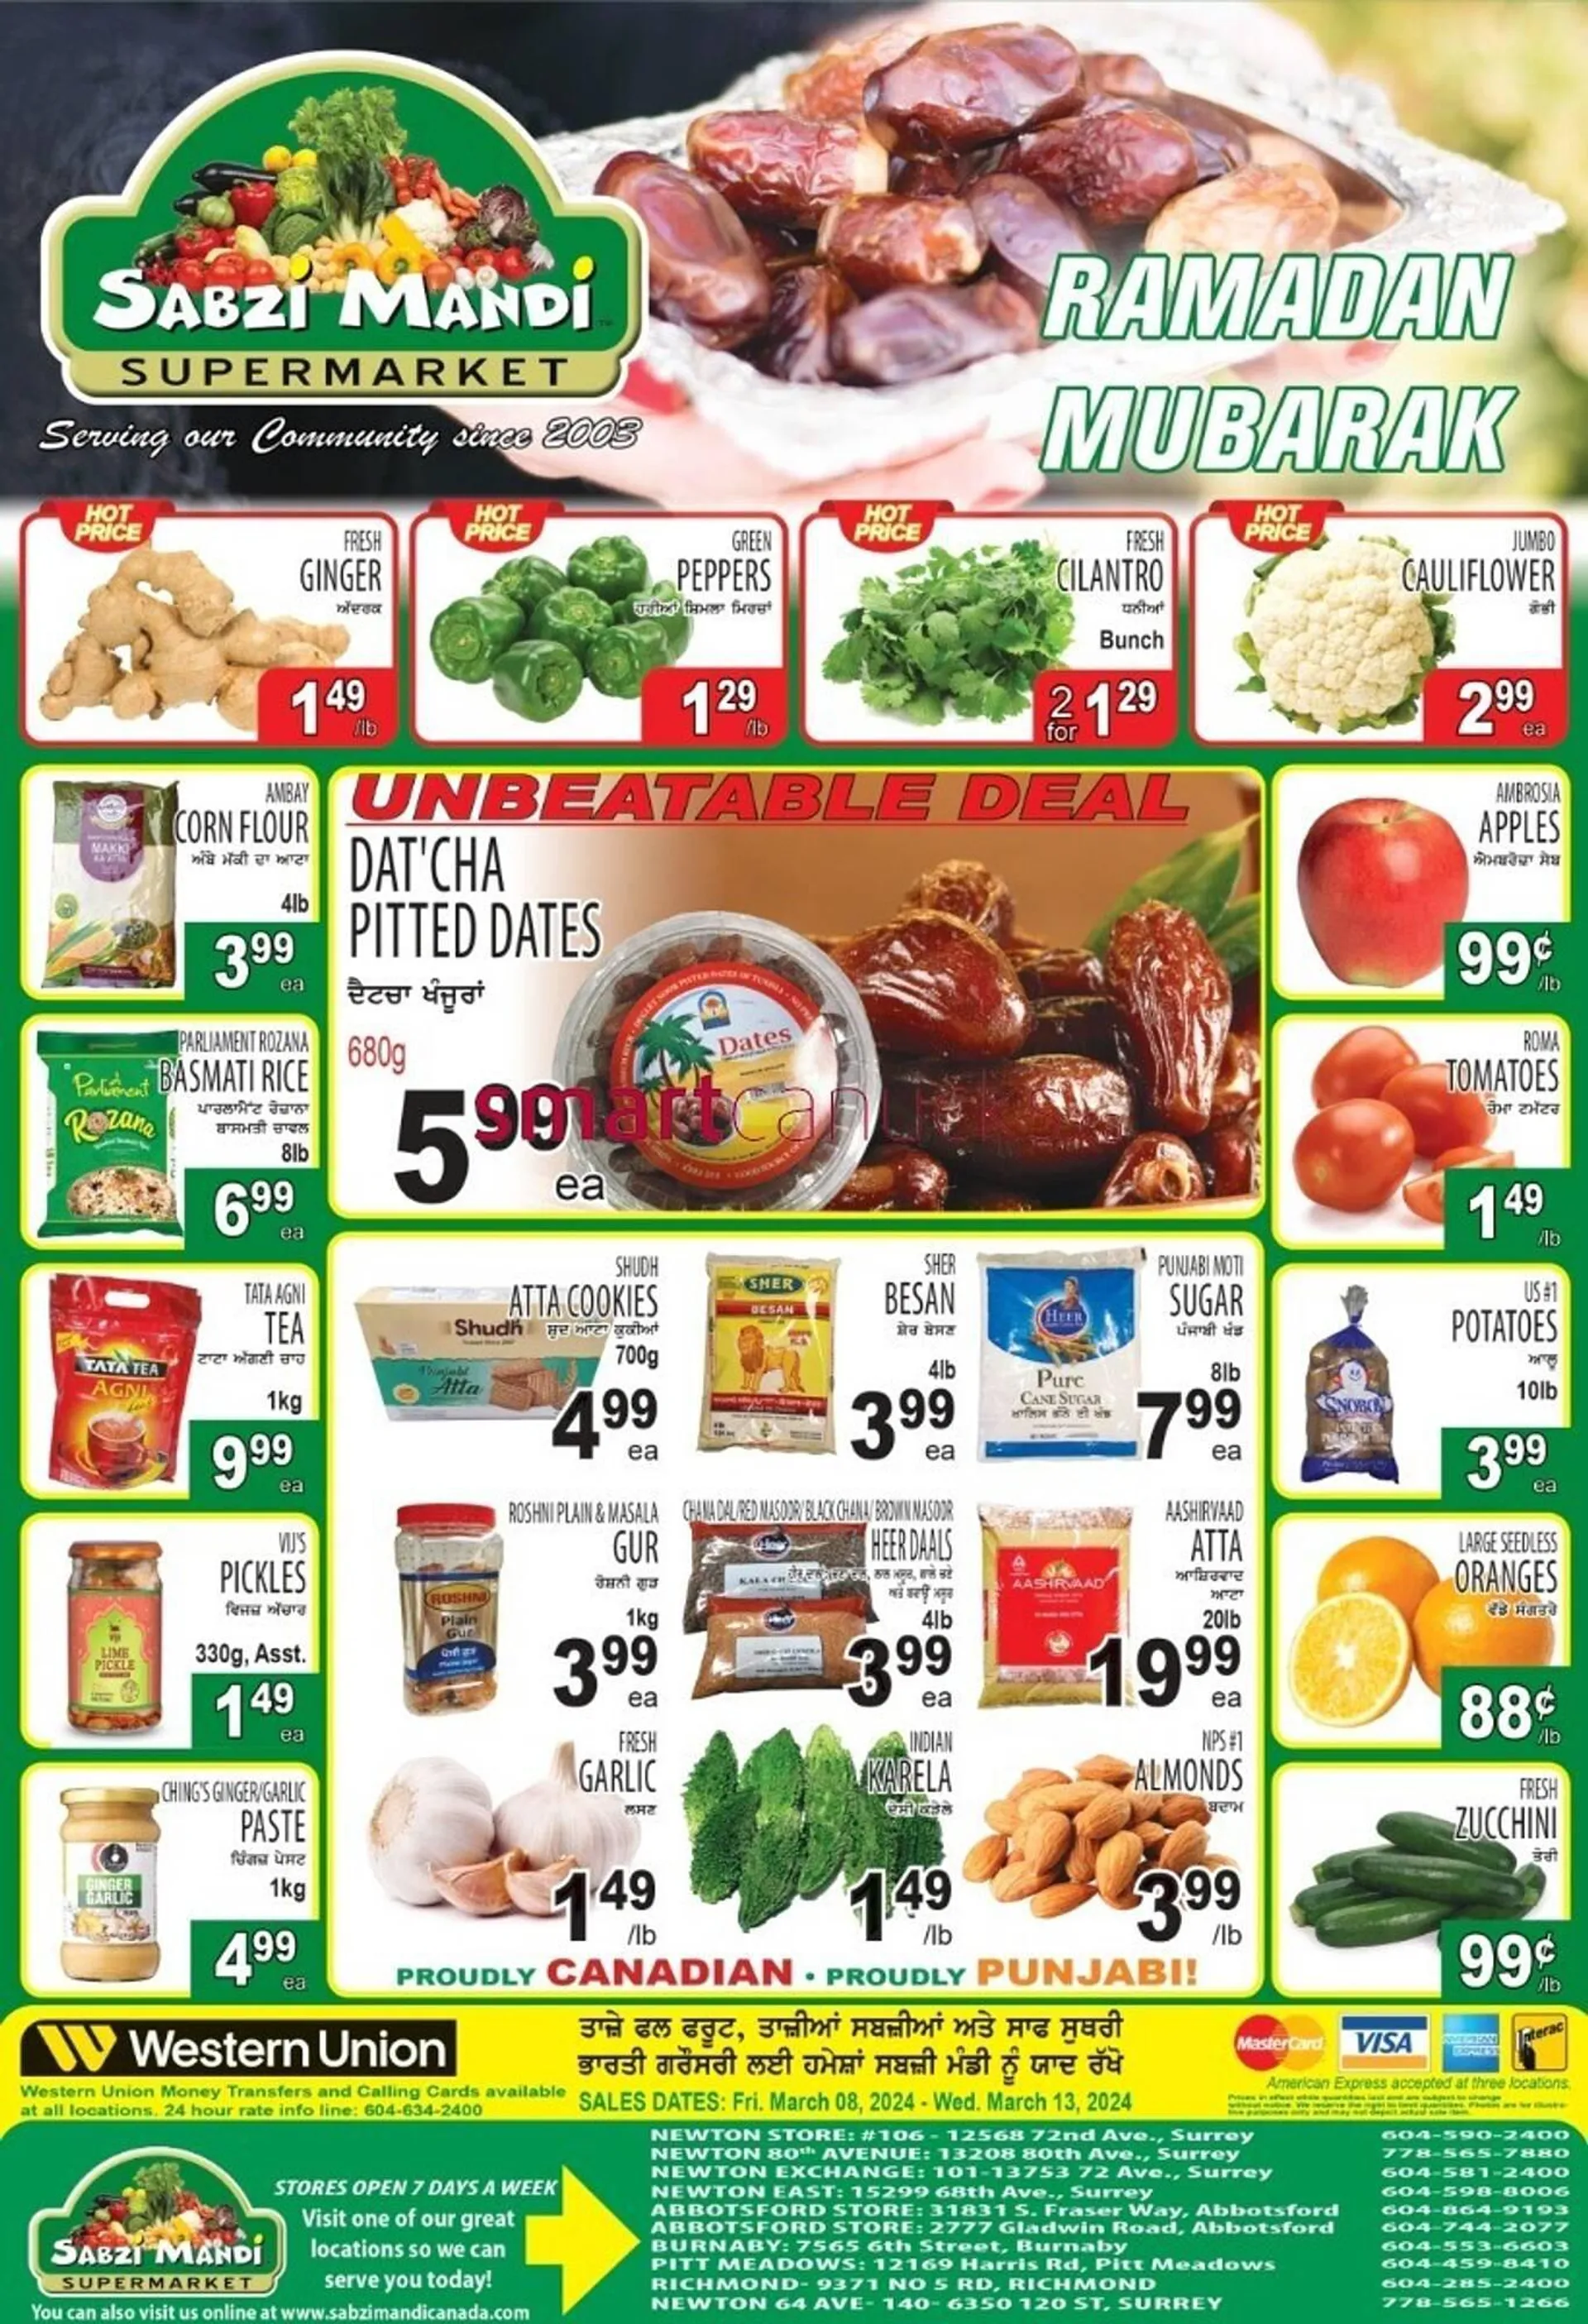 Sabzi Mandi Supermarket flyer from March 8 to March 14 2024 - flyer page 1